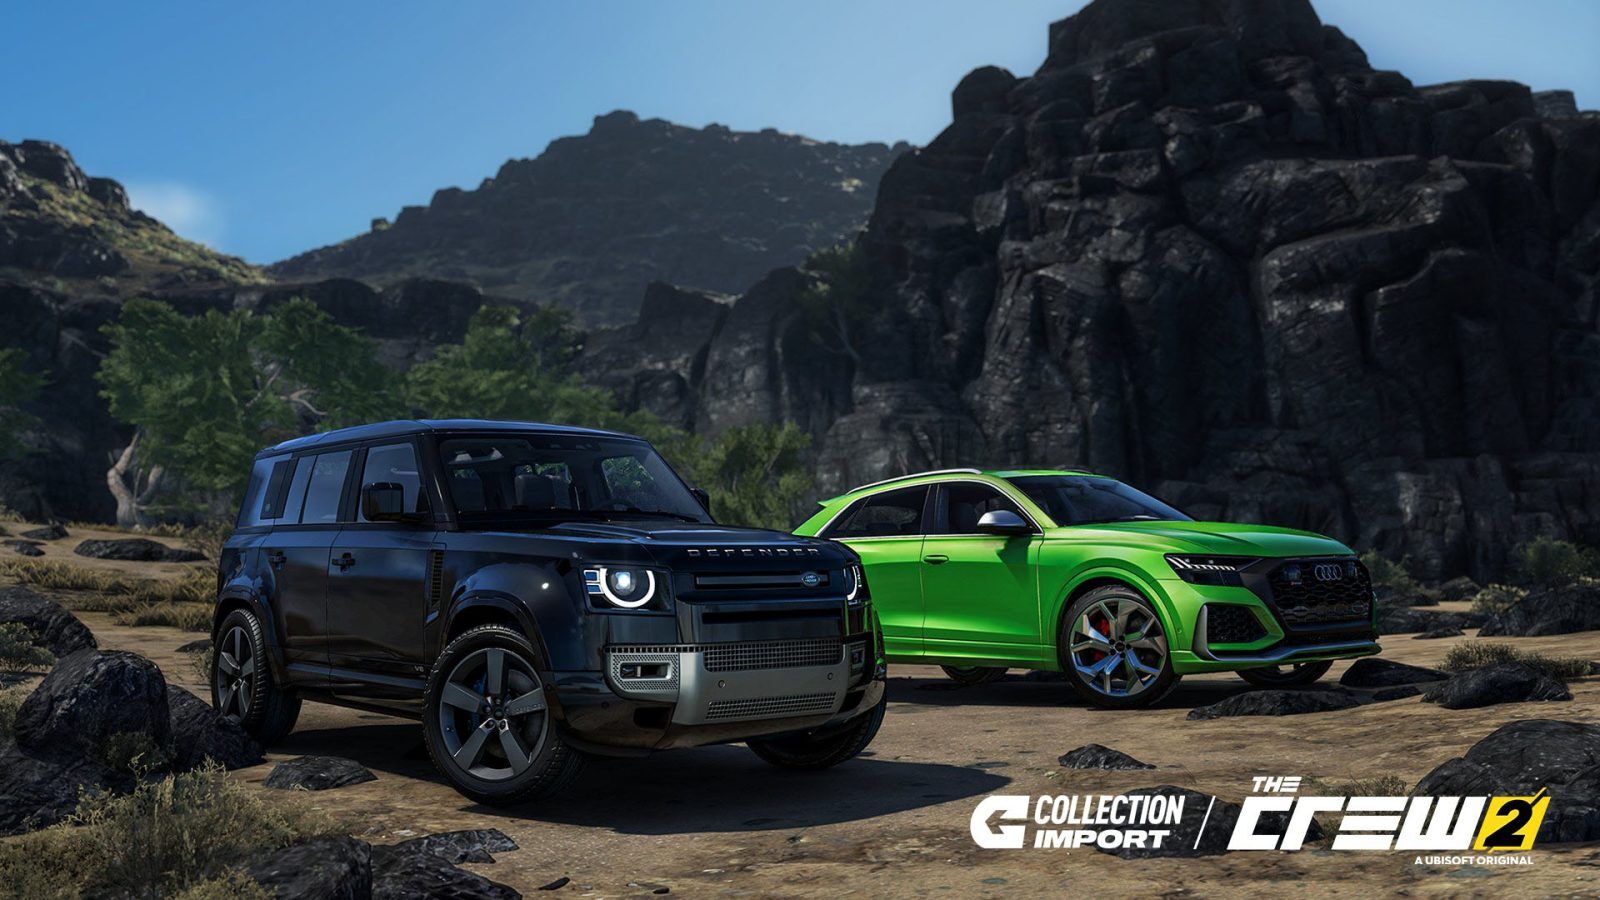 The Crew 2 - Land Rover Defender V8 and Audi RS Q8 Added to Aging Racer